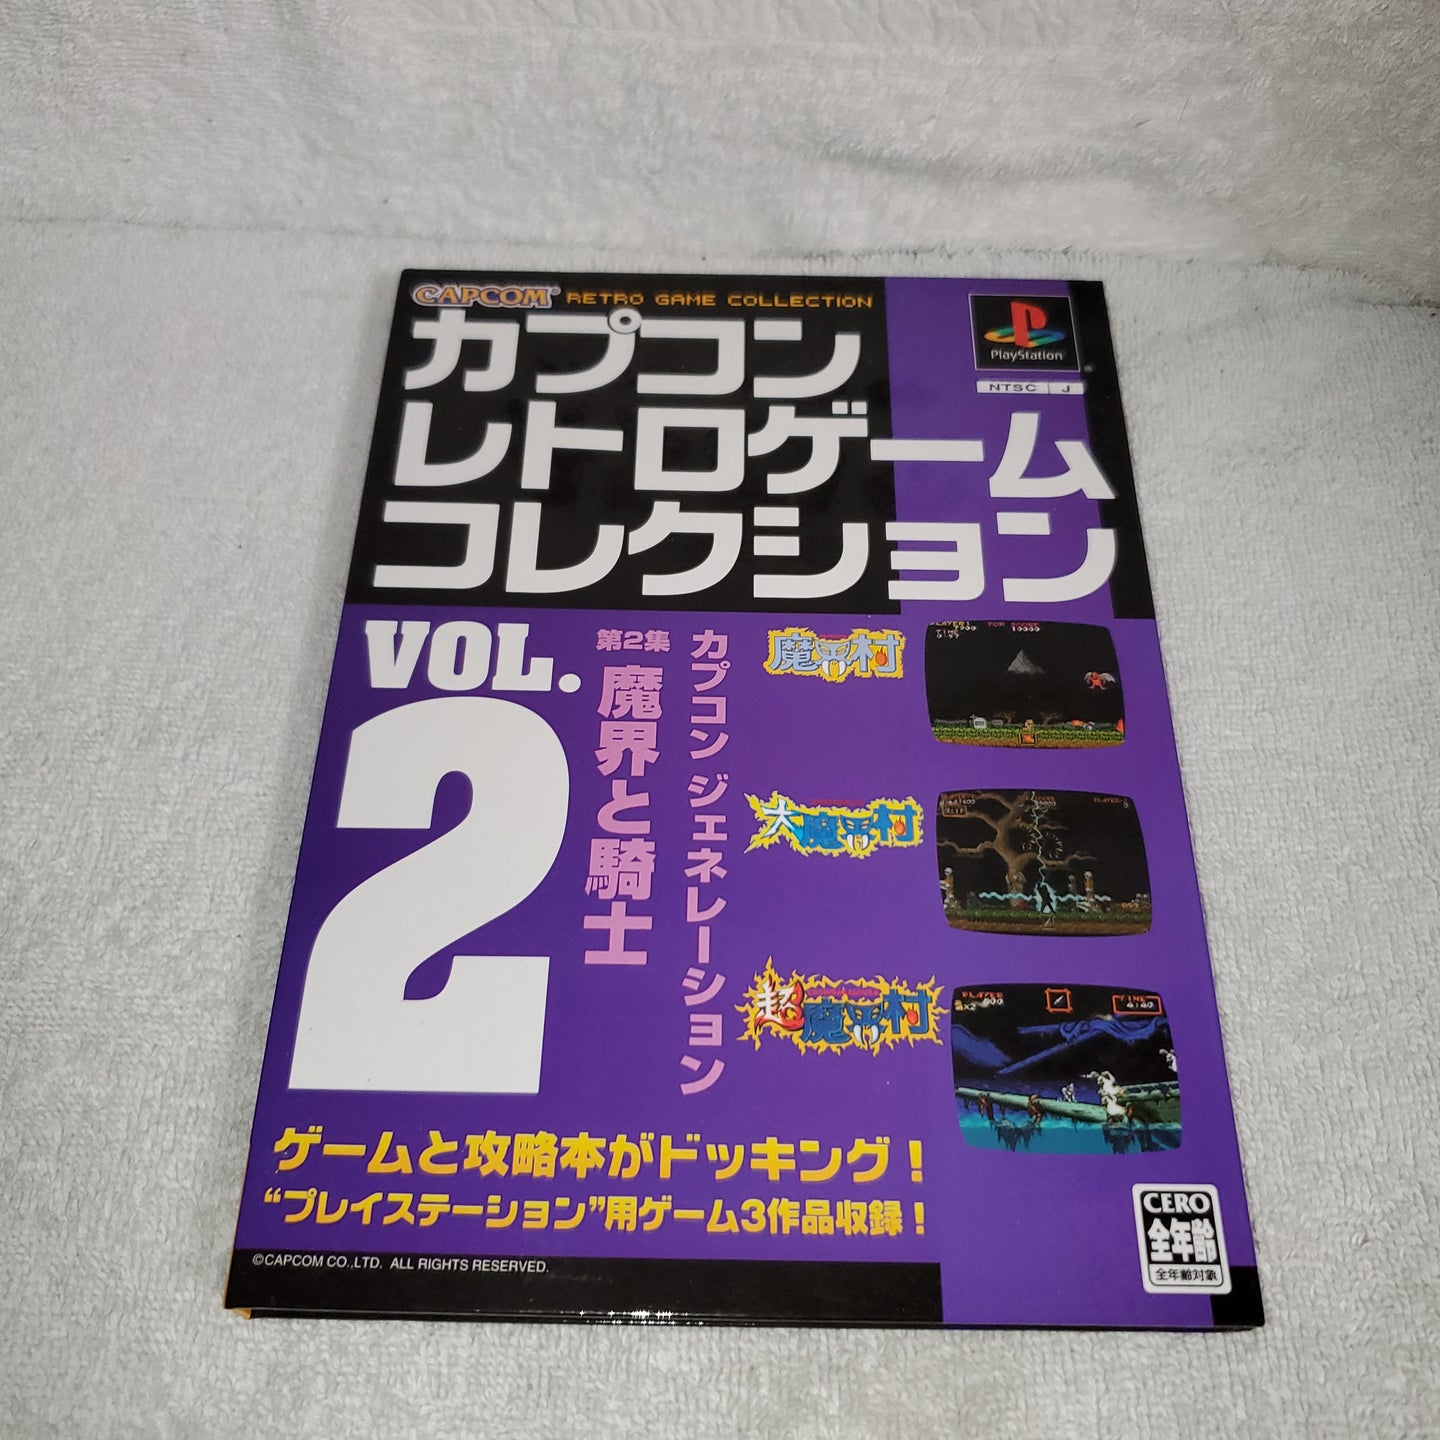 CAPCOM RETRO GAME COLLECTION VOL 2 sony playstation ps1 japan